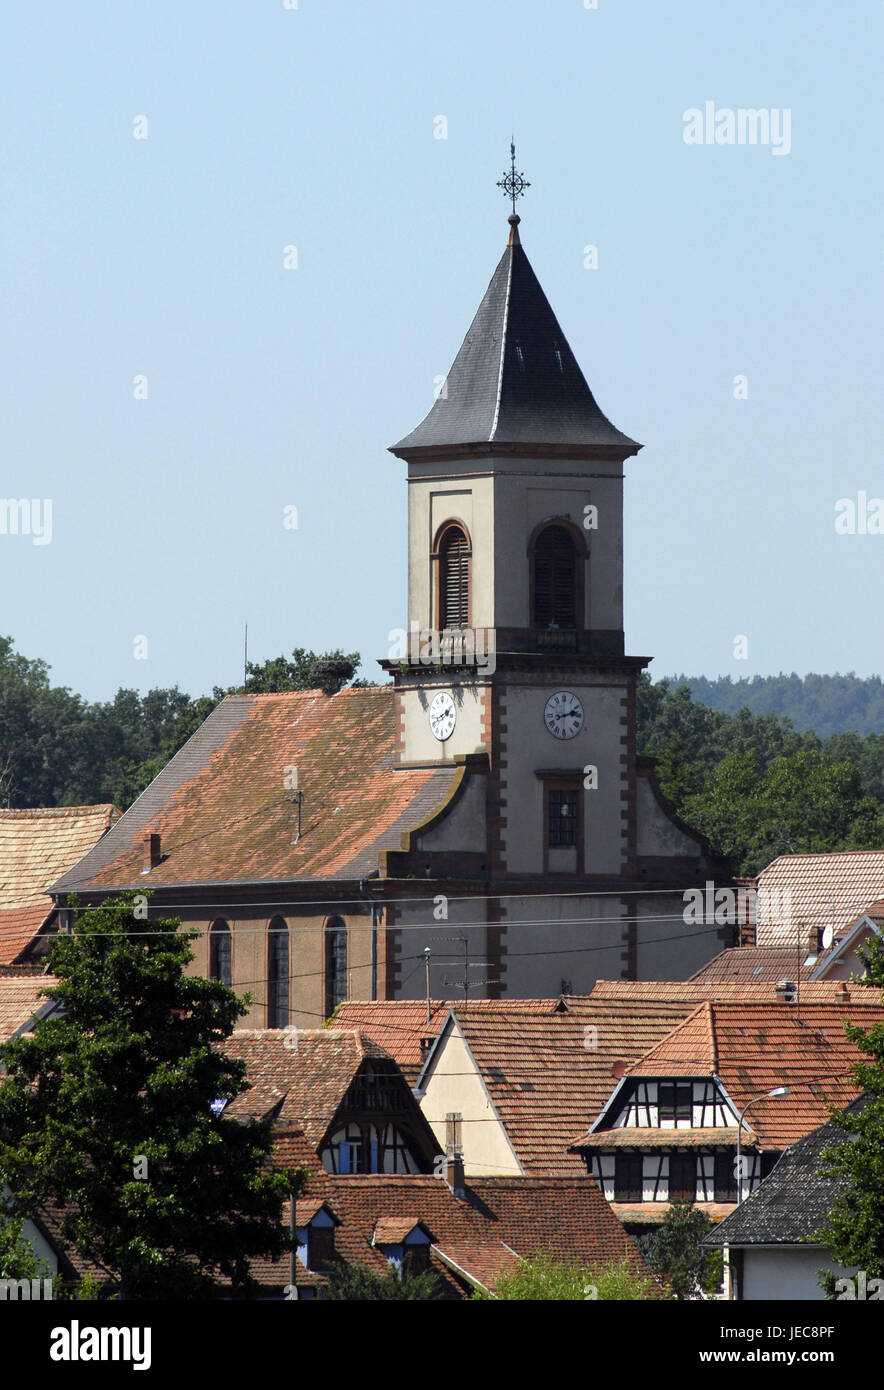 France, Alsace, Bas-Rhin, place, church, village, church, sacred construction, architecture, steeple, houses, residential houses, roofs, faith, religion, Christianity, tower, steeple, clock, Stock Photo